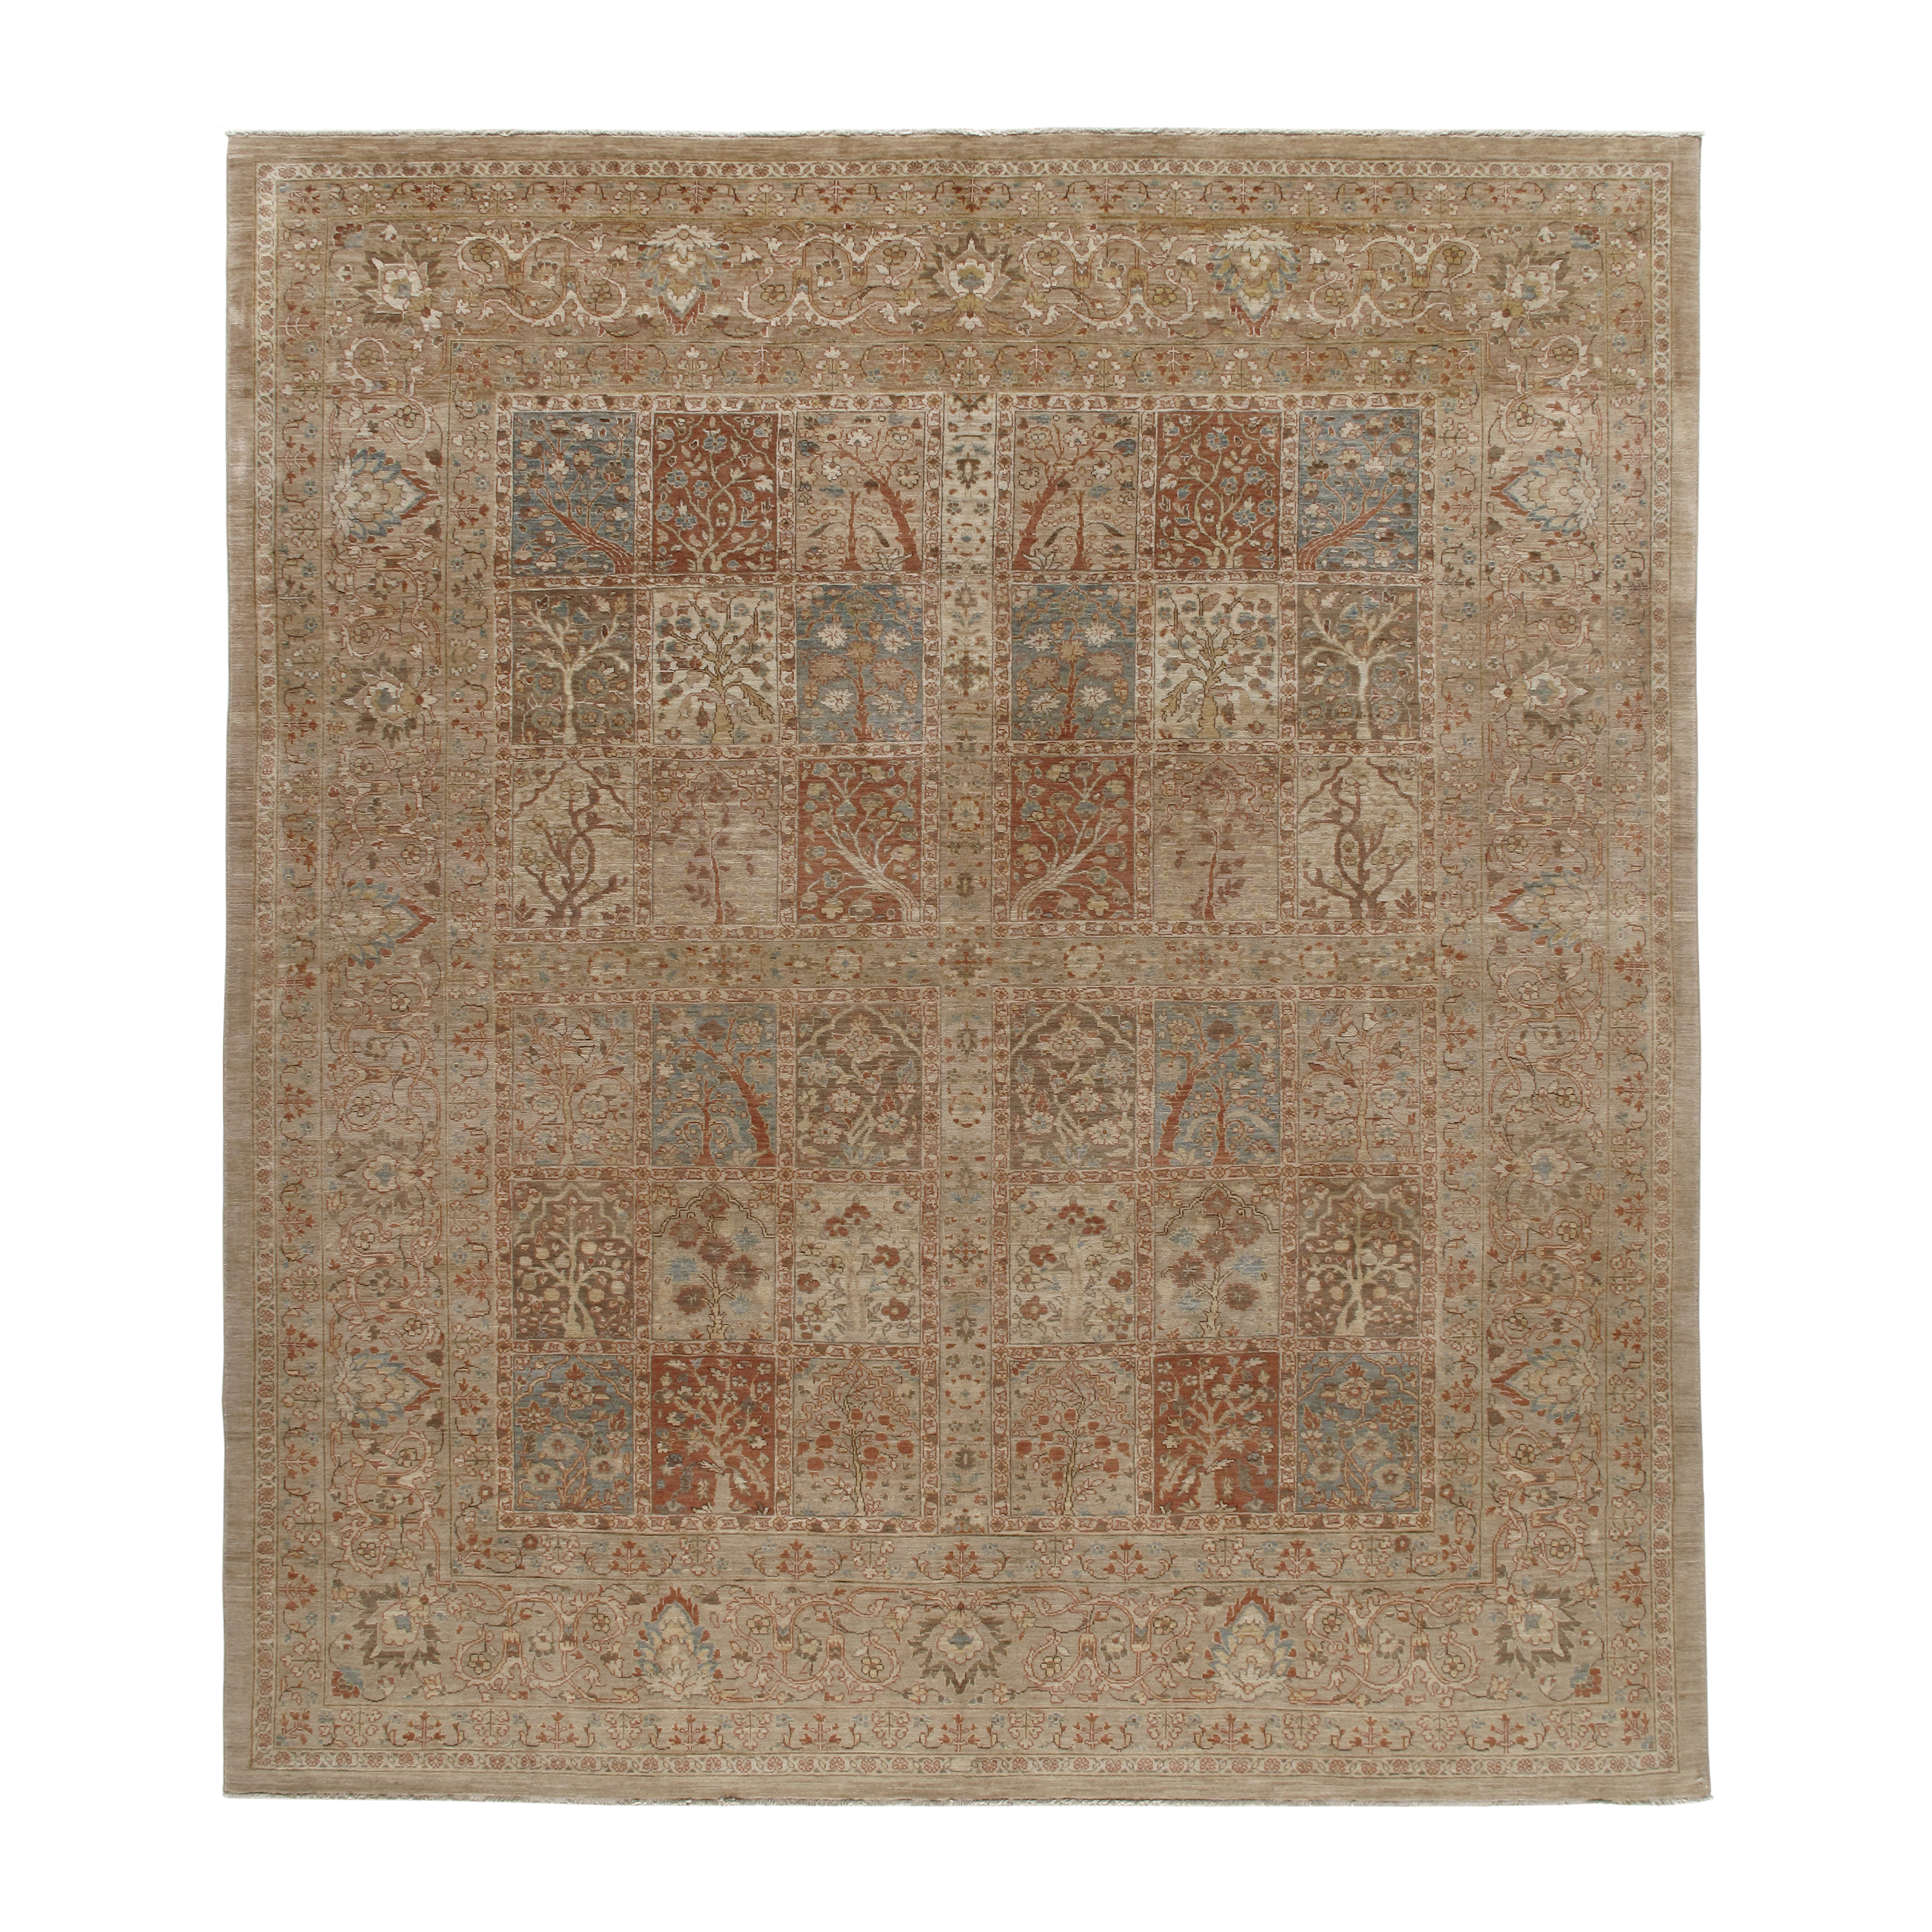 This Persian Tabriz rug is crafted using all natural and durable material.